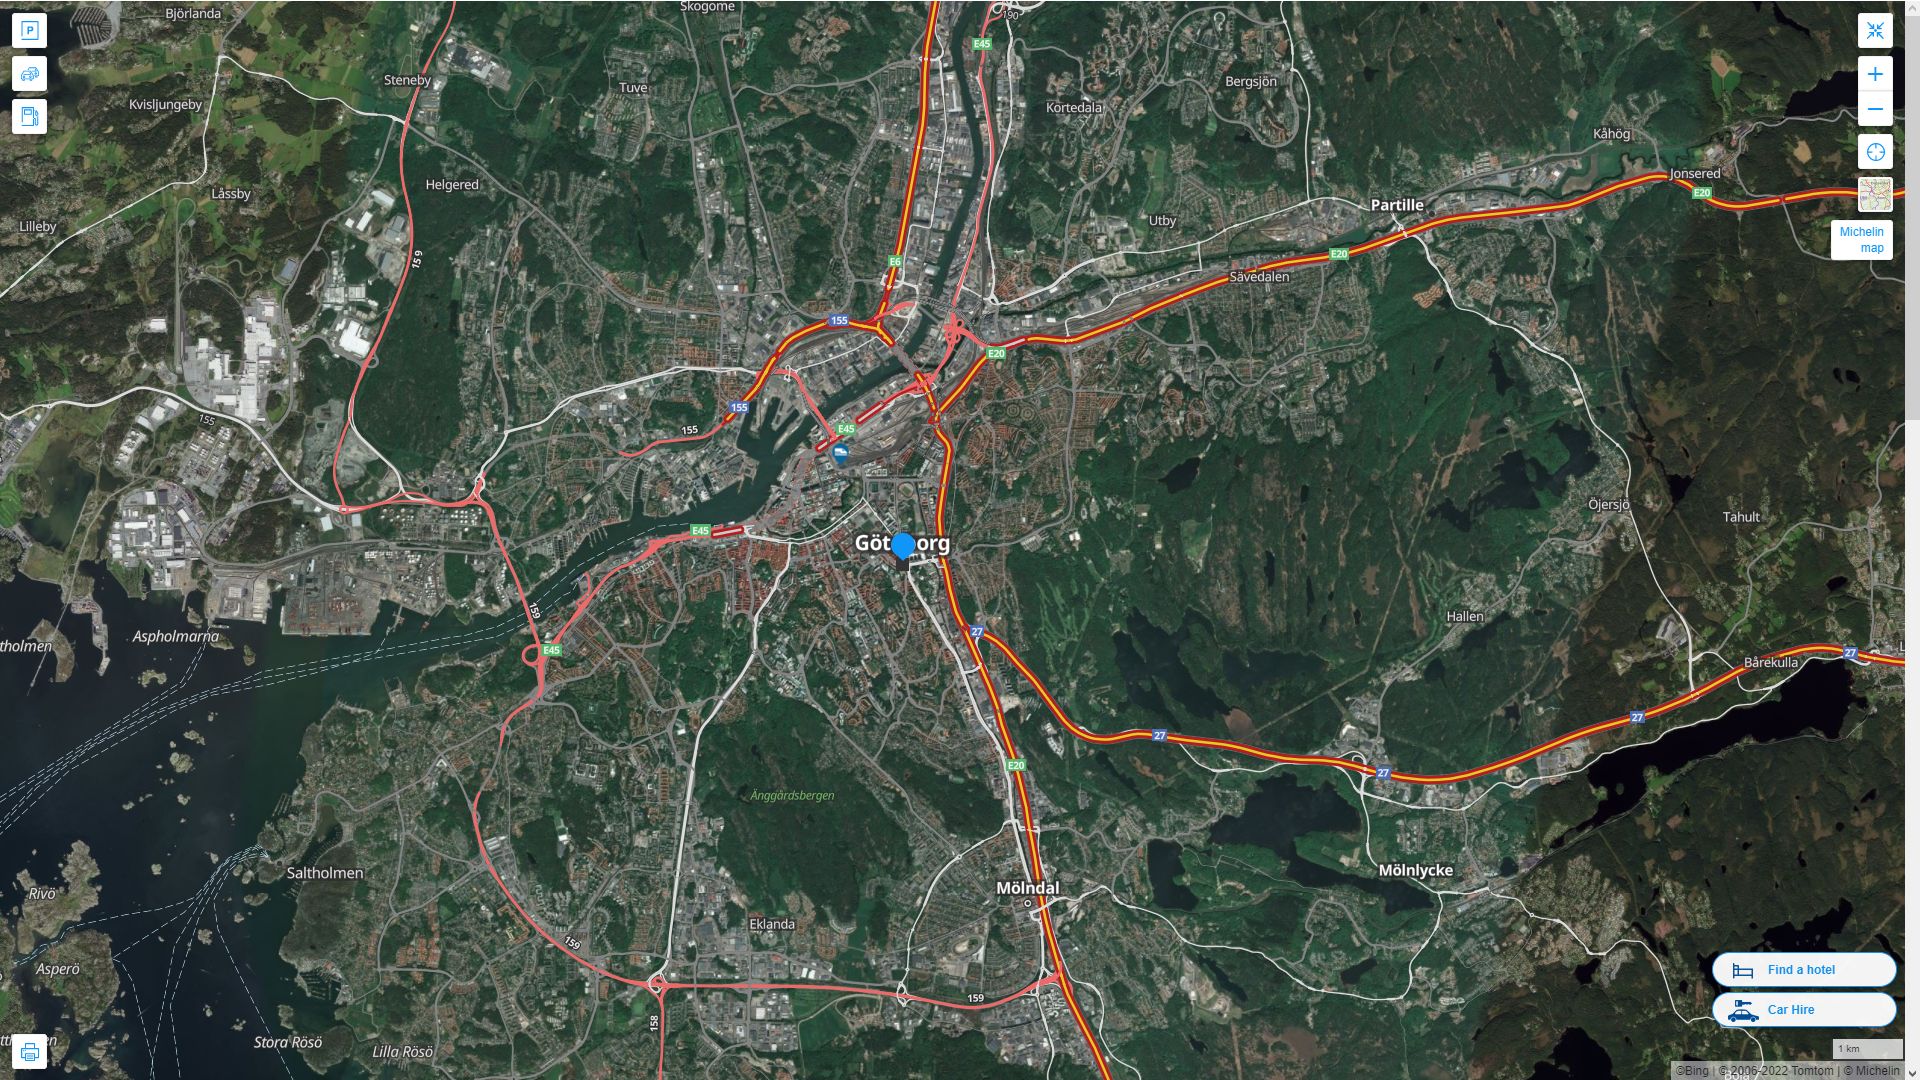 Goteborg Highway and Road Map with Satellite View